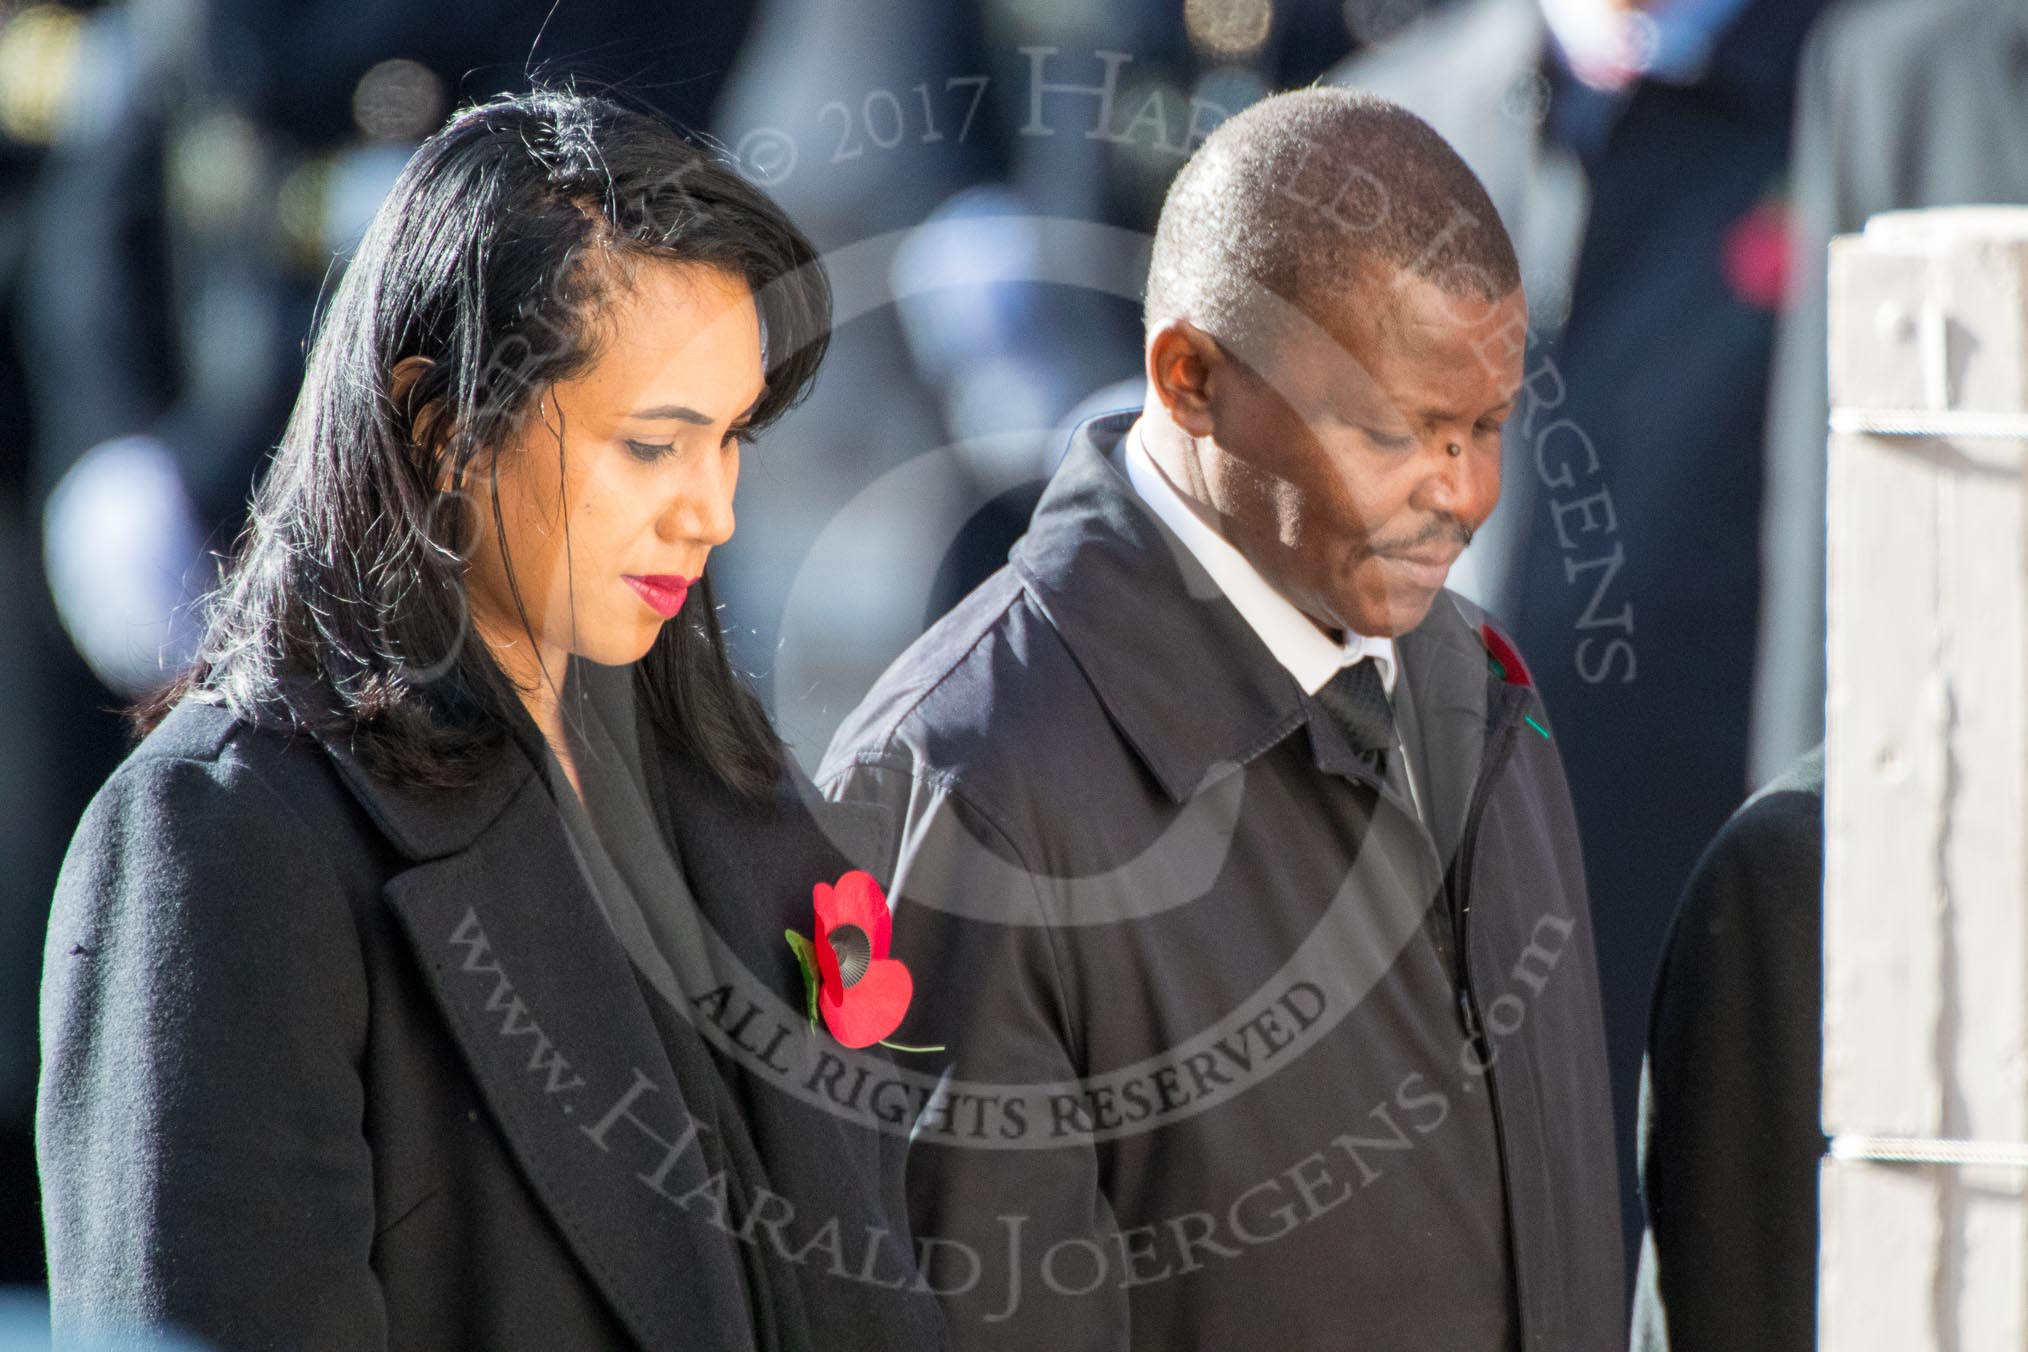 The High Commissioner of Tonga, Titilupe Fanetupouvava'u Tu'ivakan and the  High Commissioner of Eswatini during Remembrance Sunday Cenotaph Ceremony 2018 at Horse Guards Parade, Westminster, London, 11 November 2018, 11:14.